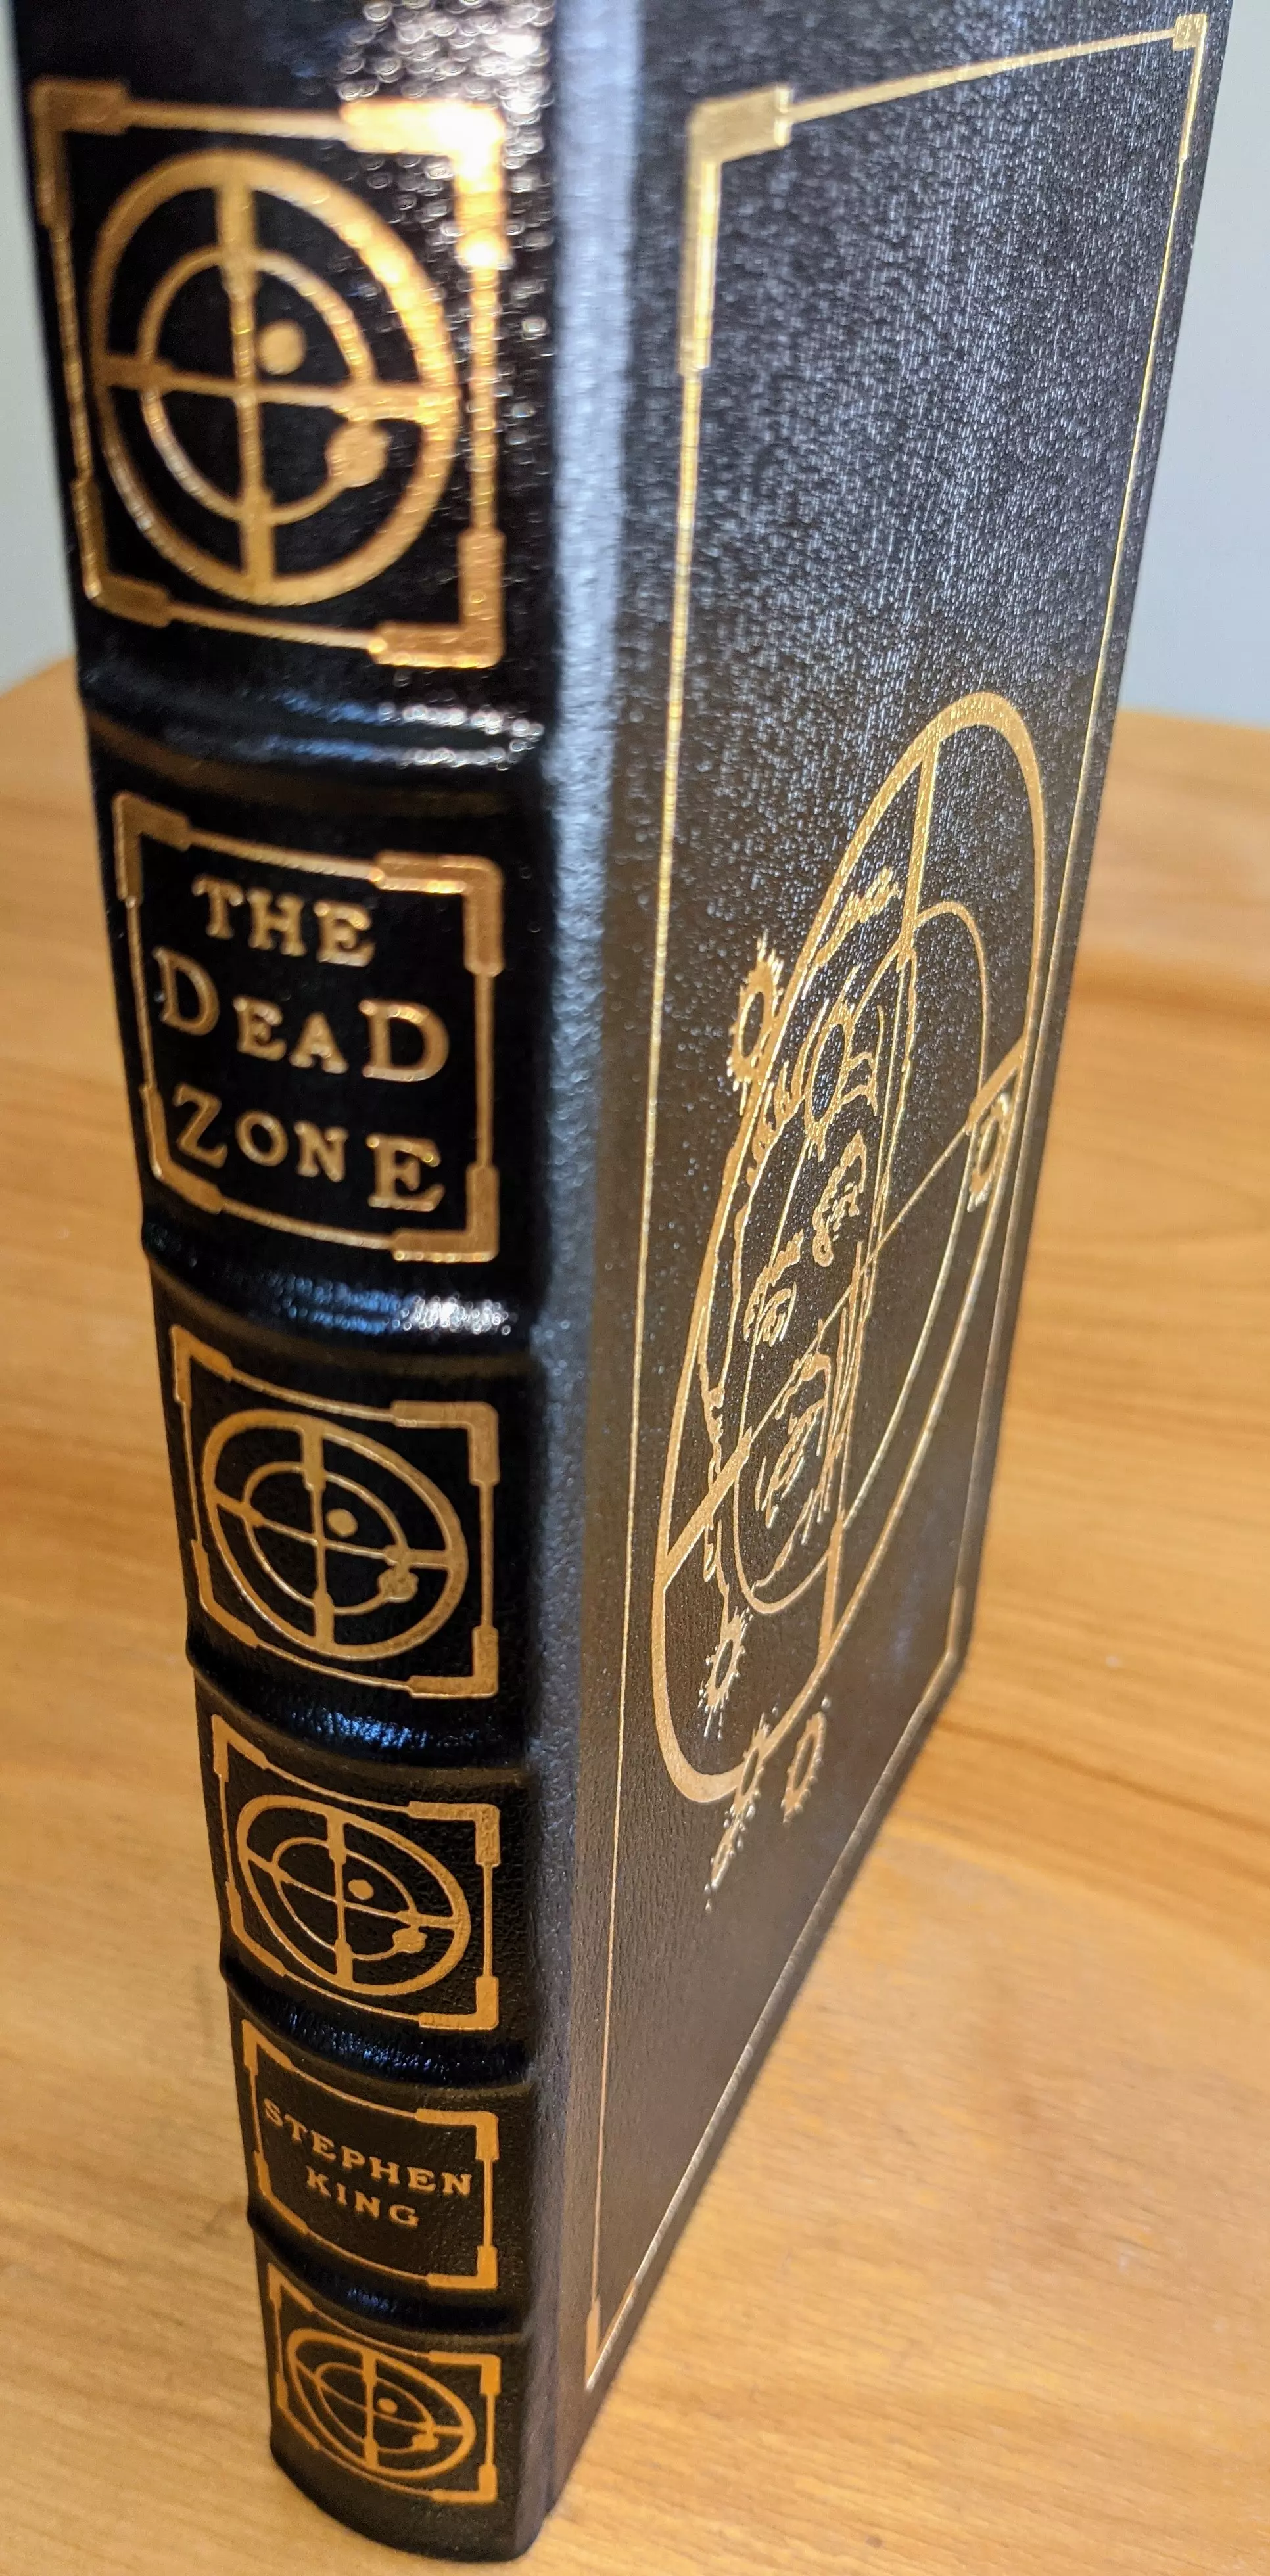 Stunning Black Leather Bound hardback book with hubbed spine, cover artwork in 22kt gold, printed on archival paper with gold gilded edges, smyth sewing & concealed muslin joints
	  - original artwork by Jill Bauman